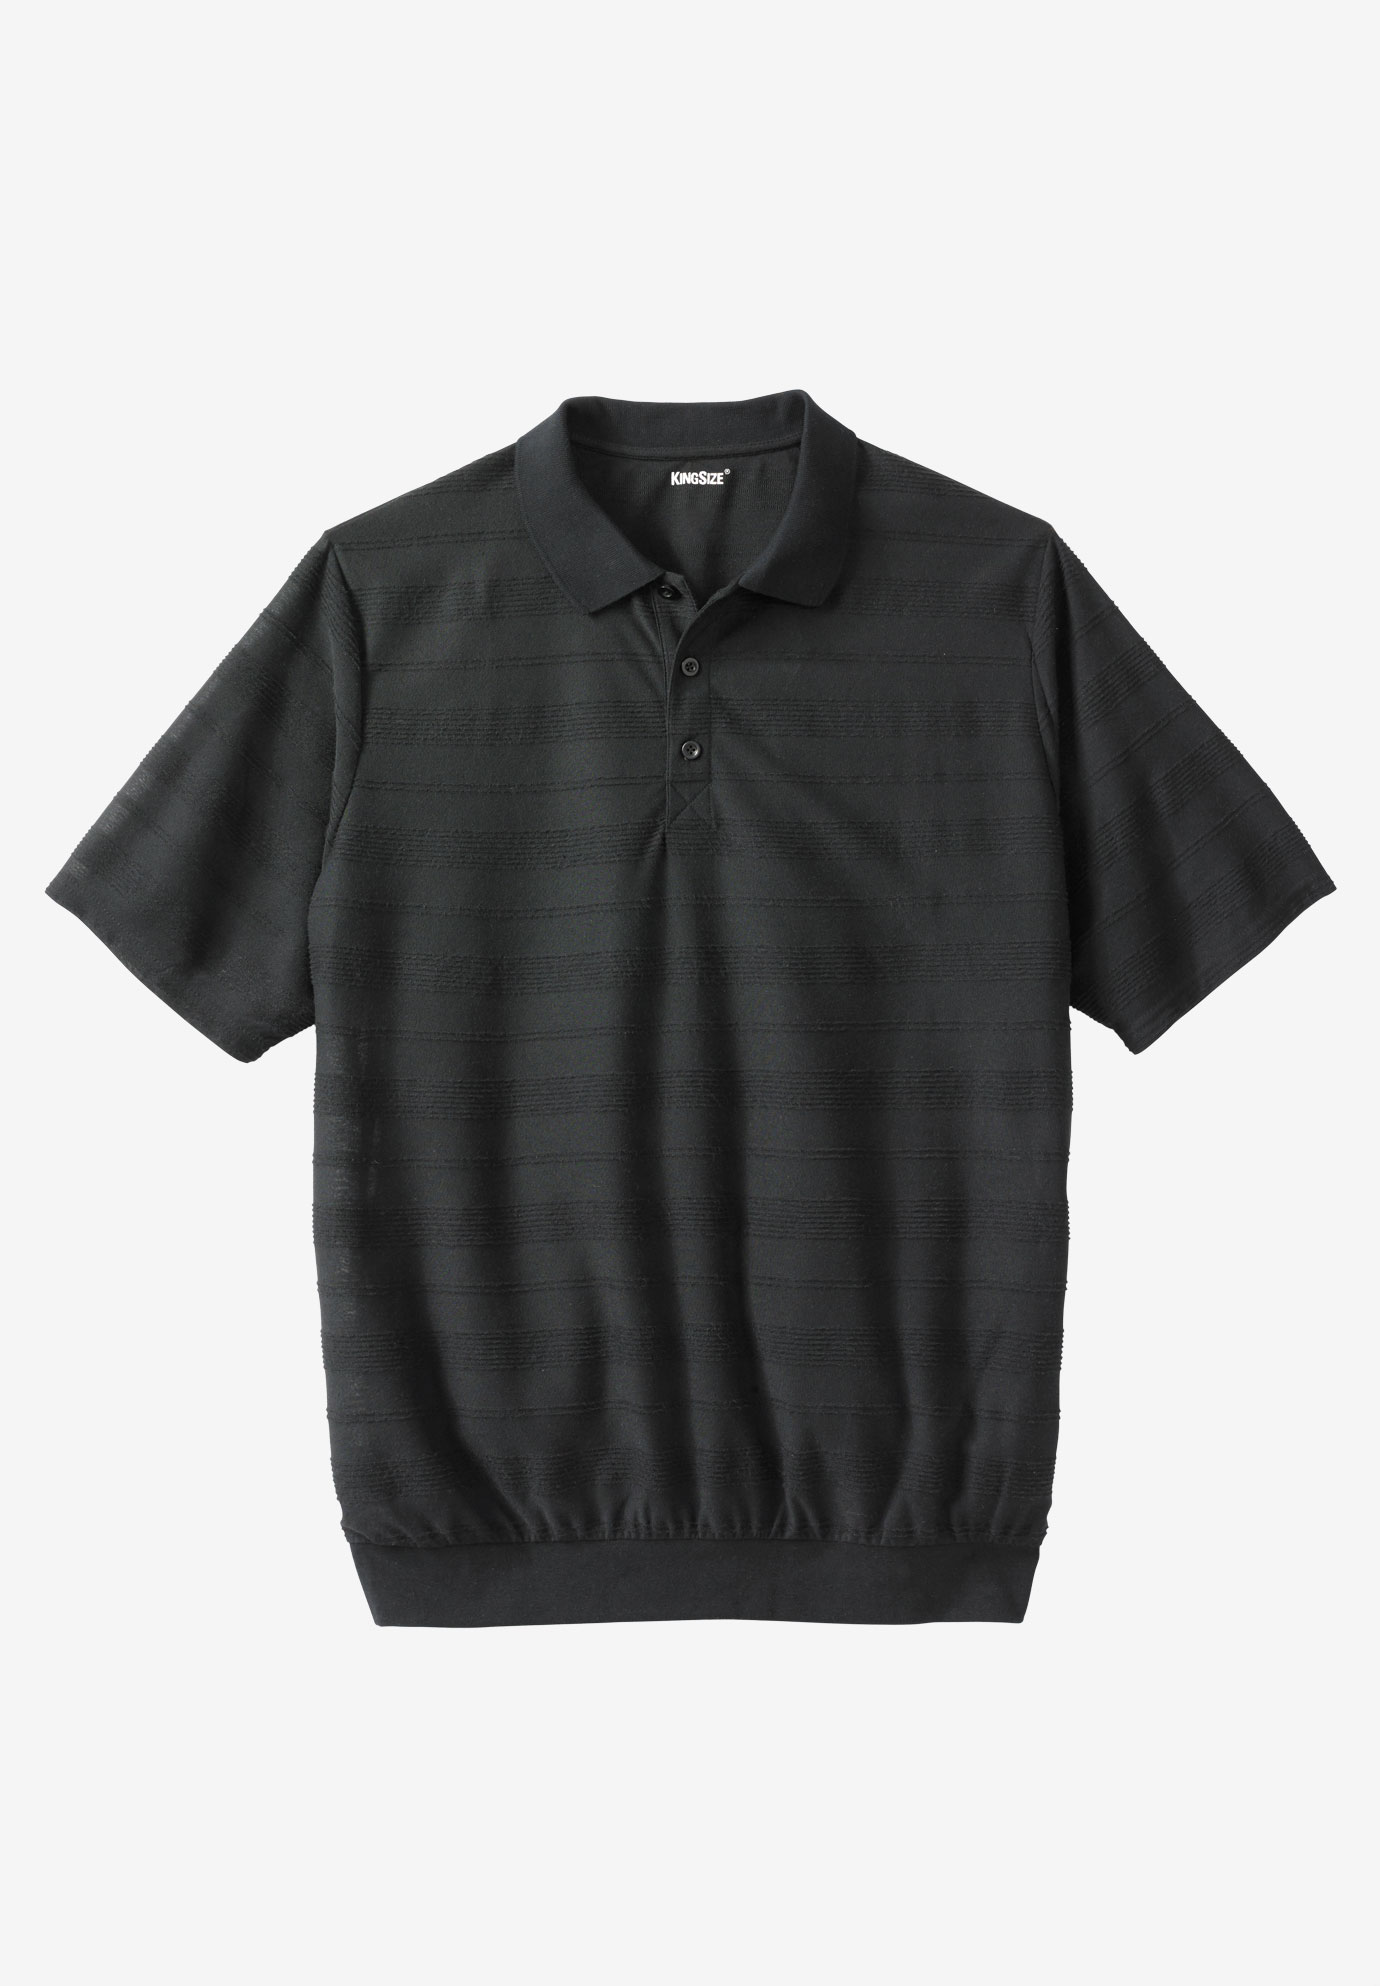 Soft Touch Textured Banded Bottom Polo Shirt | King Size